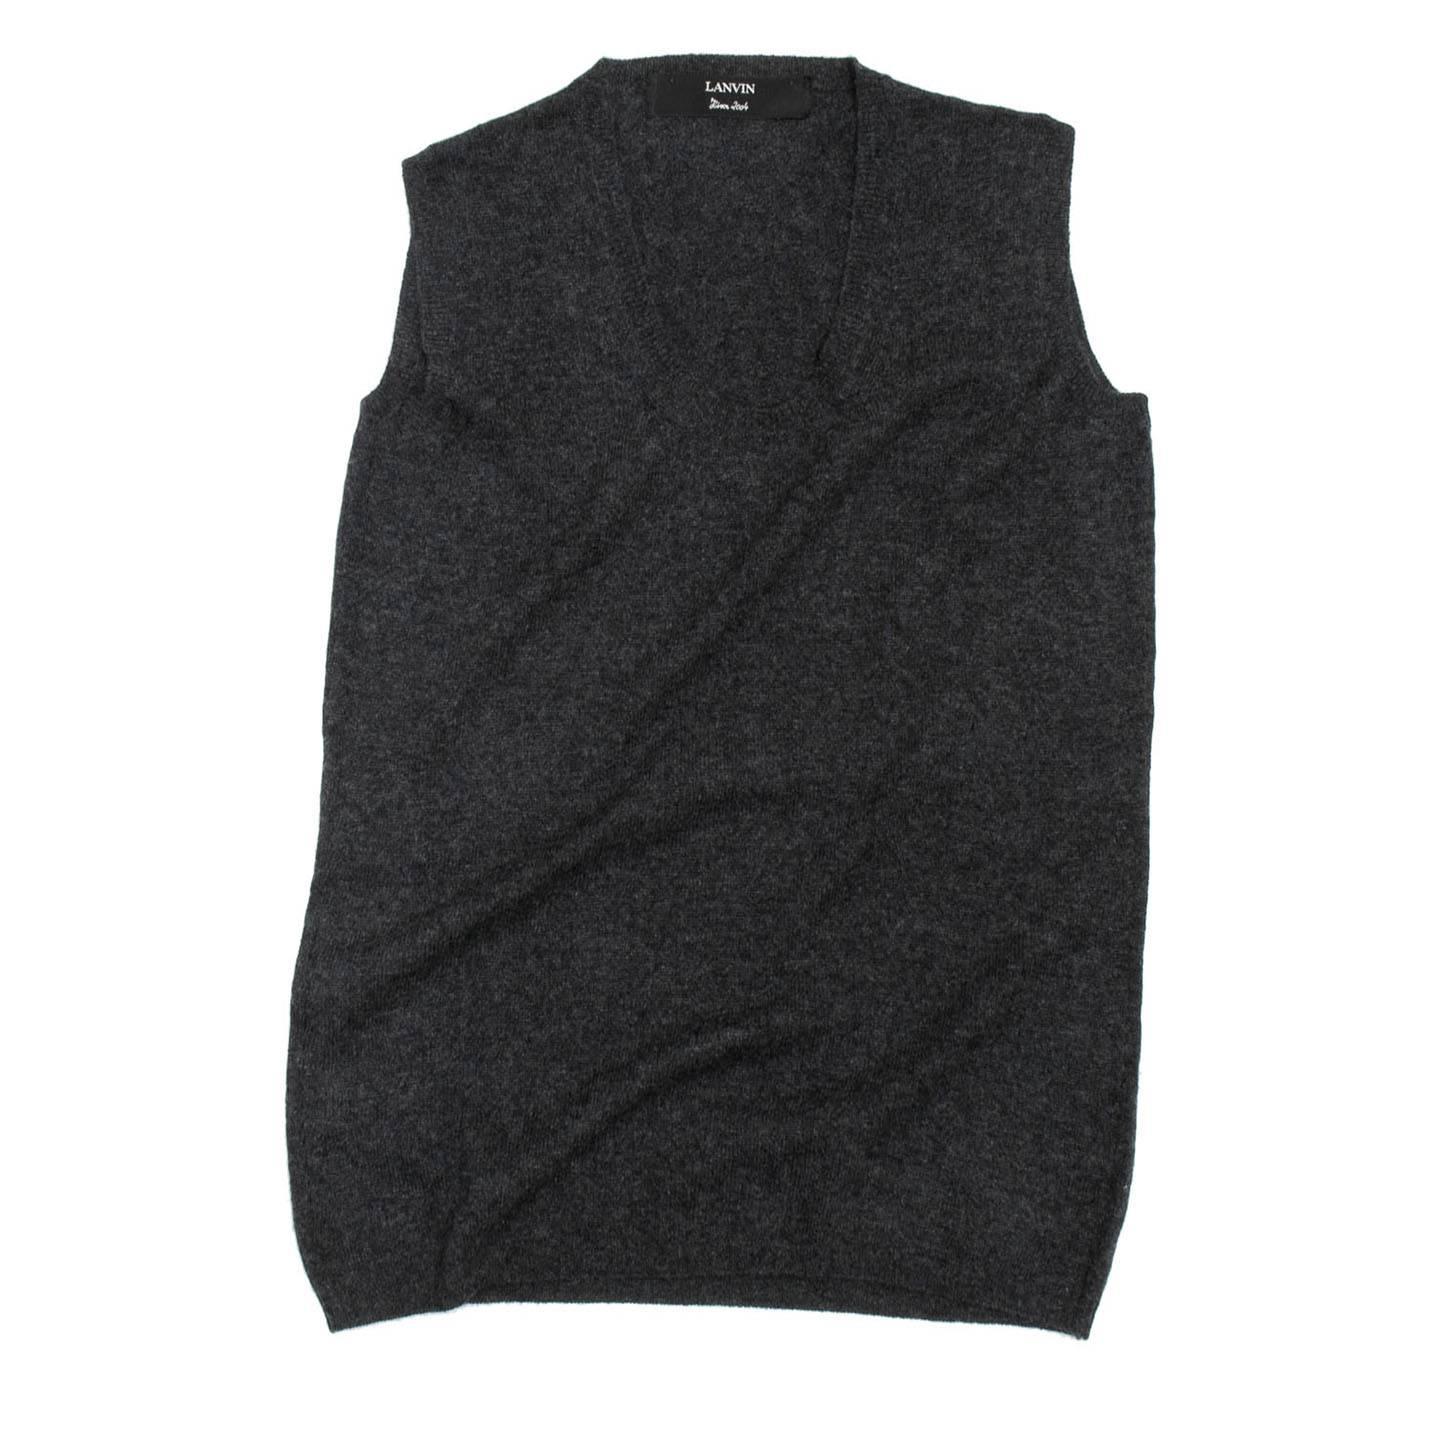 Charcoal grey cashmere and wool deep crew neck sweater vest.

Size  M Universal sizing

Condition  Excellent: never worn